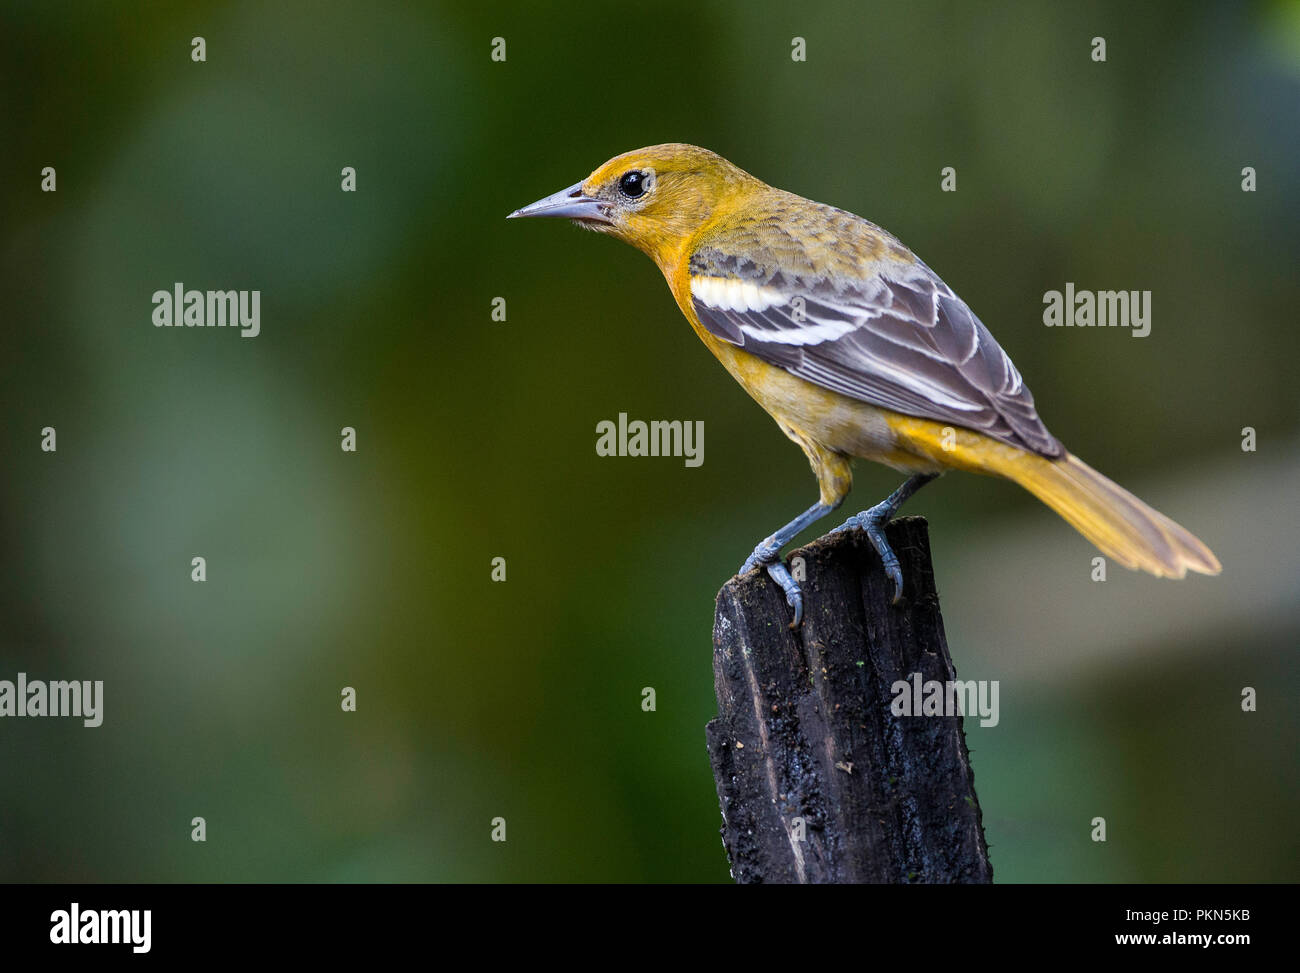 A perched female of Baltimore oriole photographed in Costa Rica Stock Photo